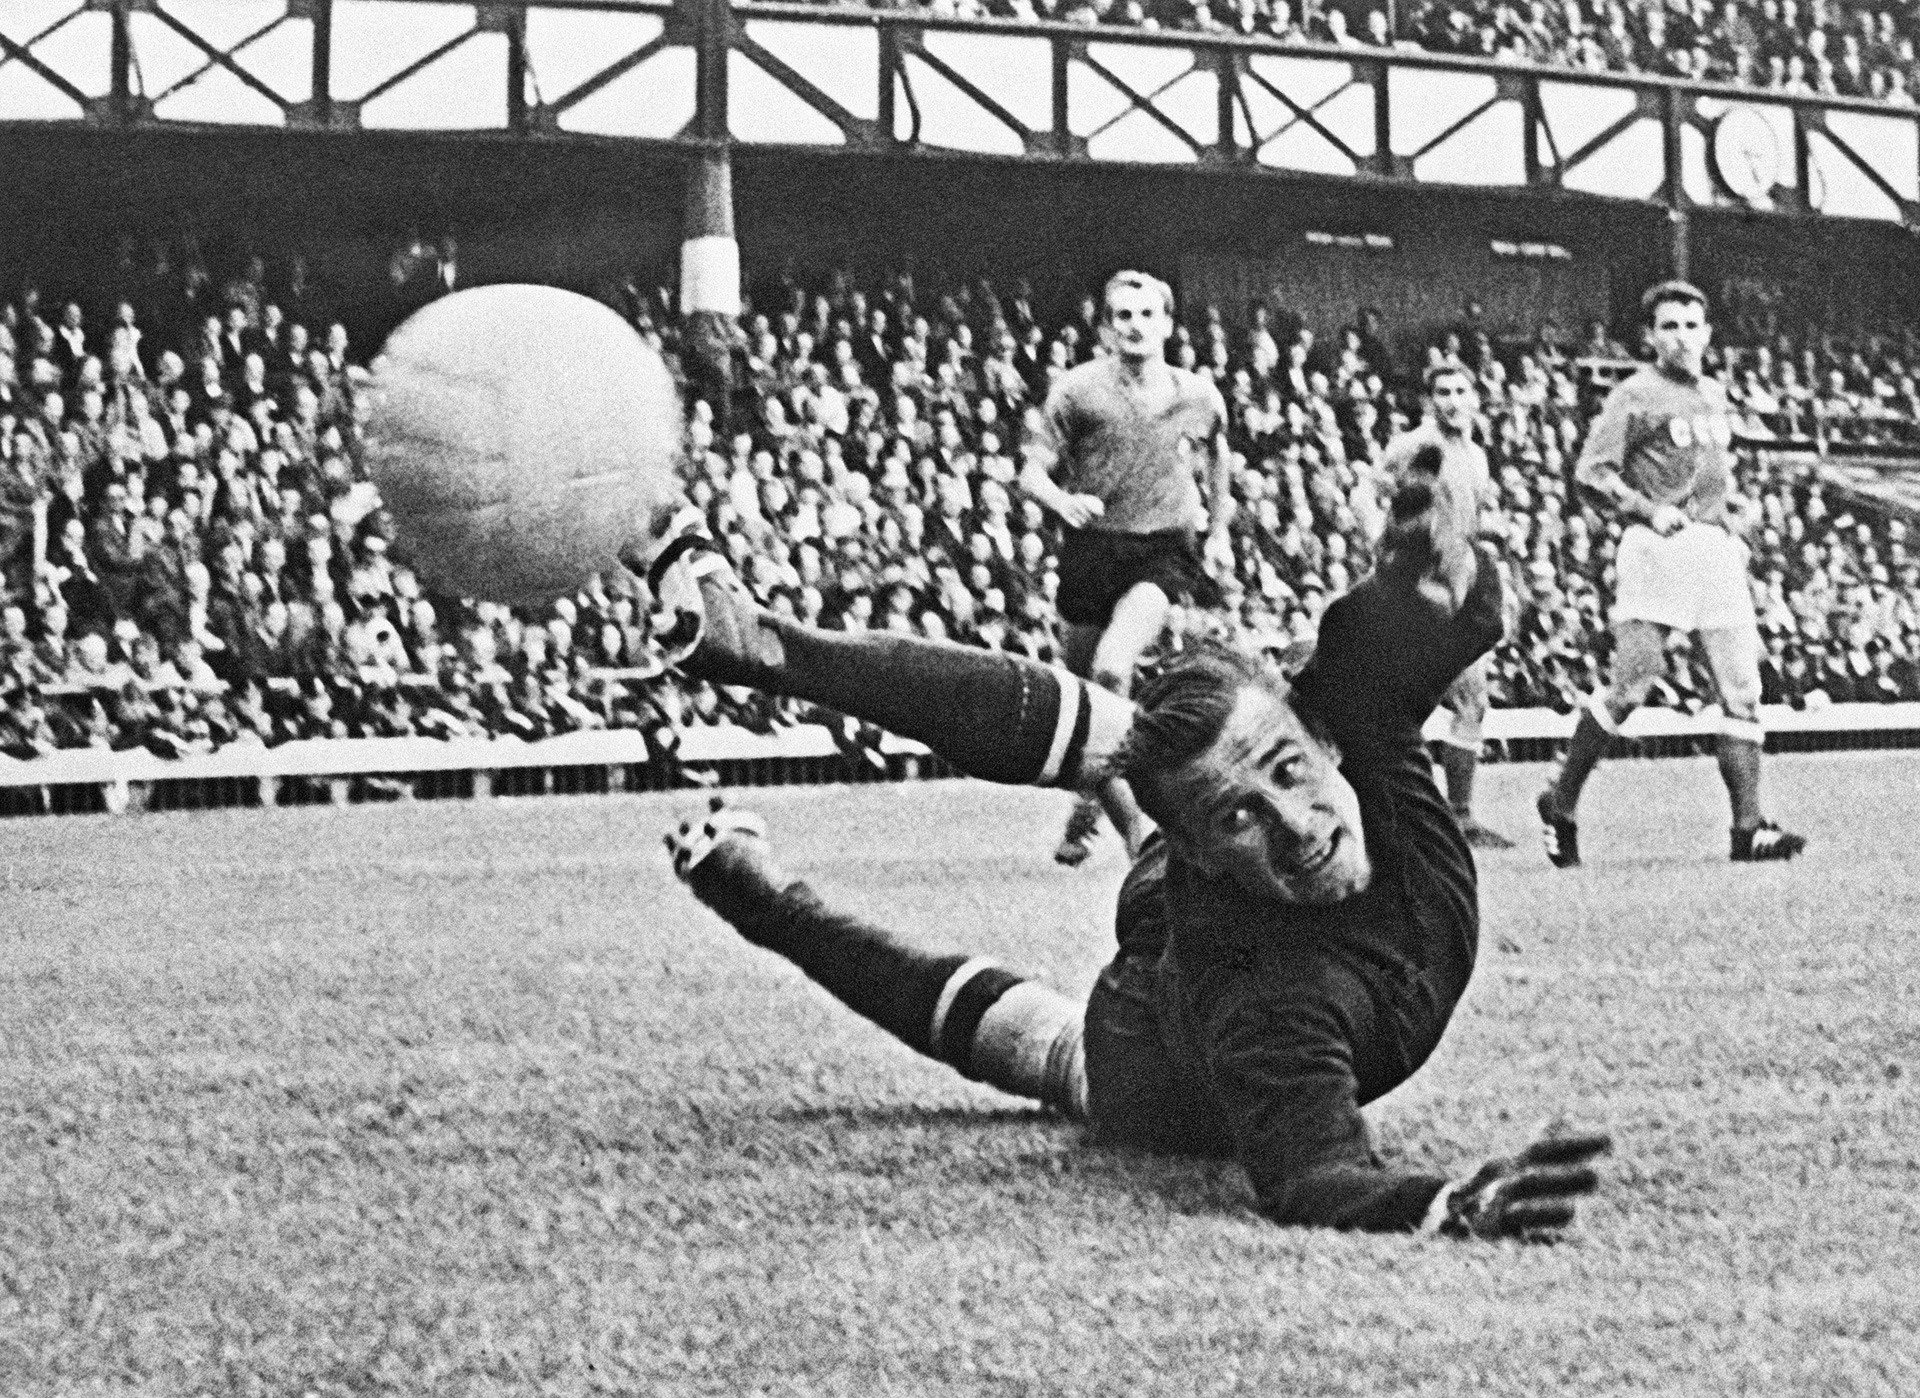 Yashin was famous for his acrobatic skills and reaction, as well as changing the pattern of goalkeeper's play.